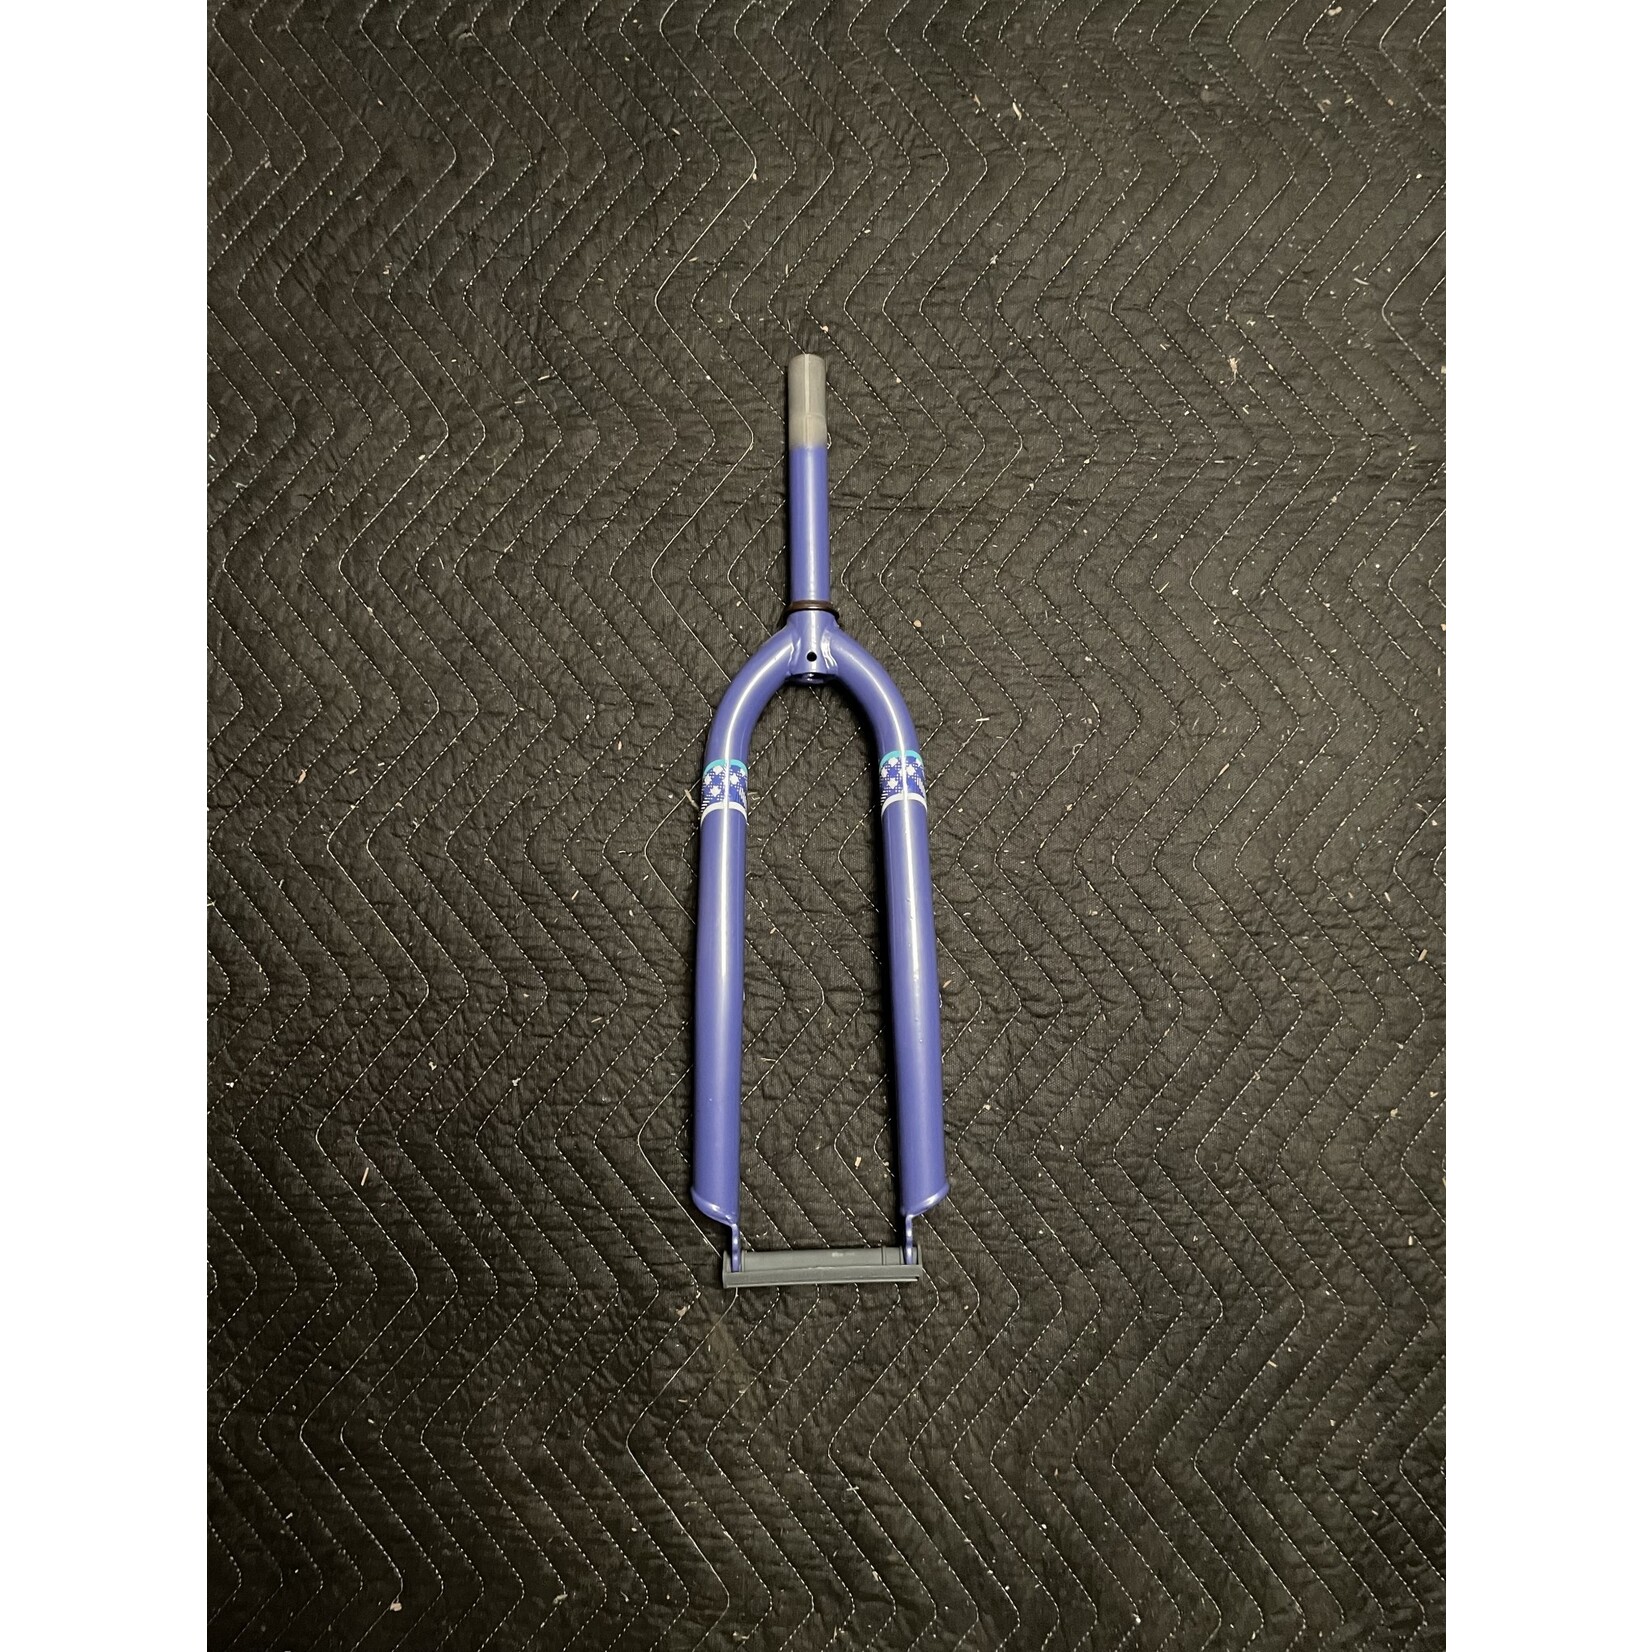 1” x 6 3/4” Threadless 26” Bicycle Fork (Periwinkle & Plaid)